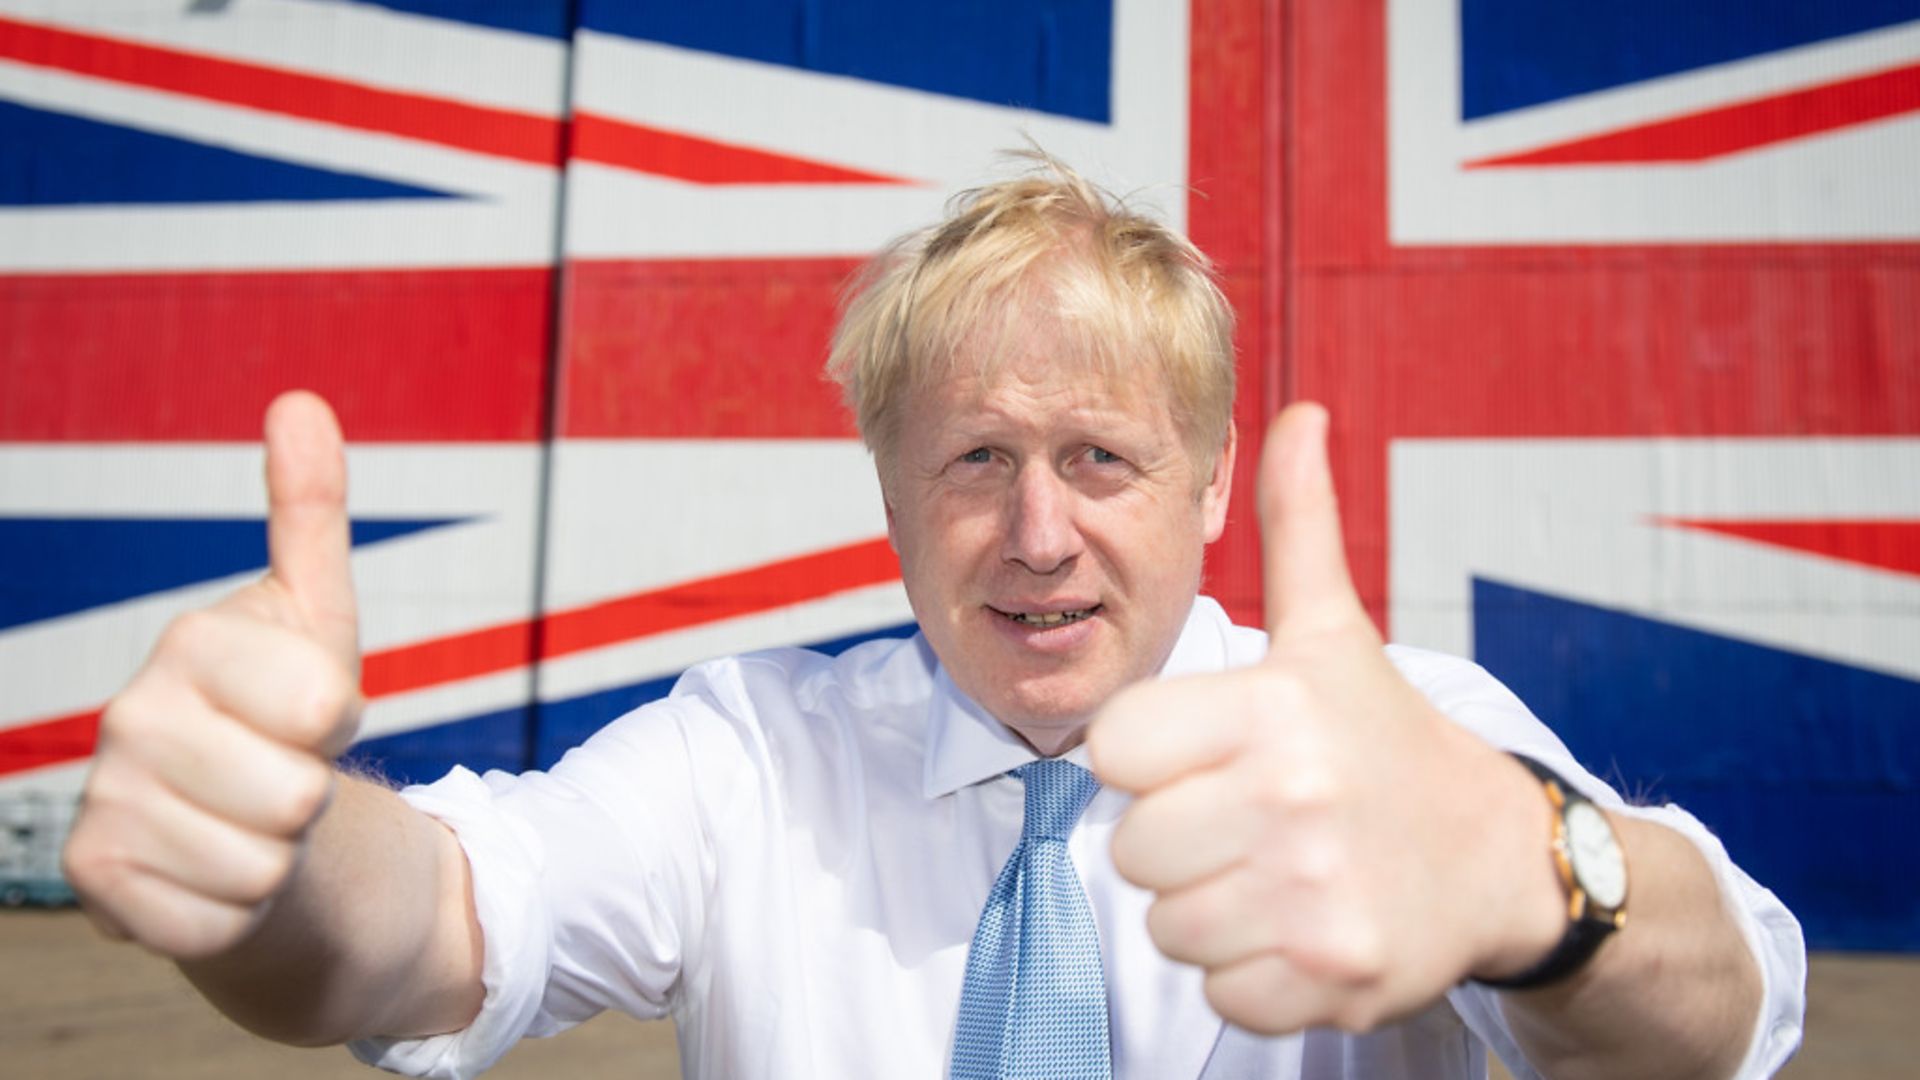 Boris Johnson poses for a 2019 photograph in front of a Union flag - Credit: Getty Images